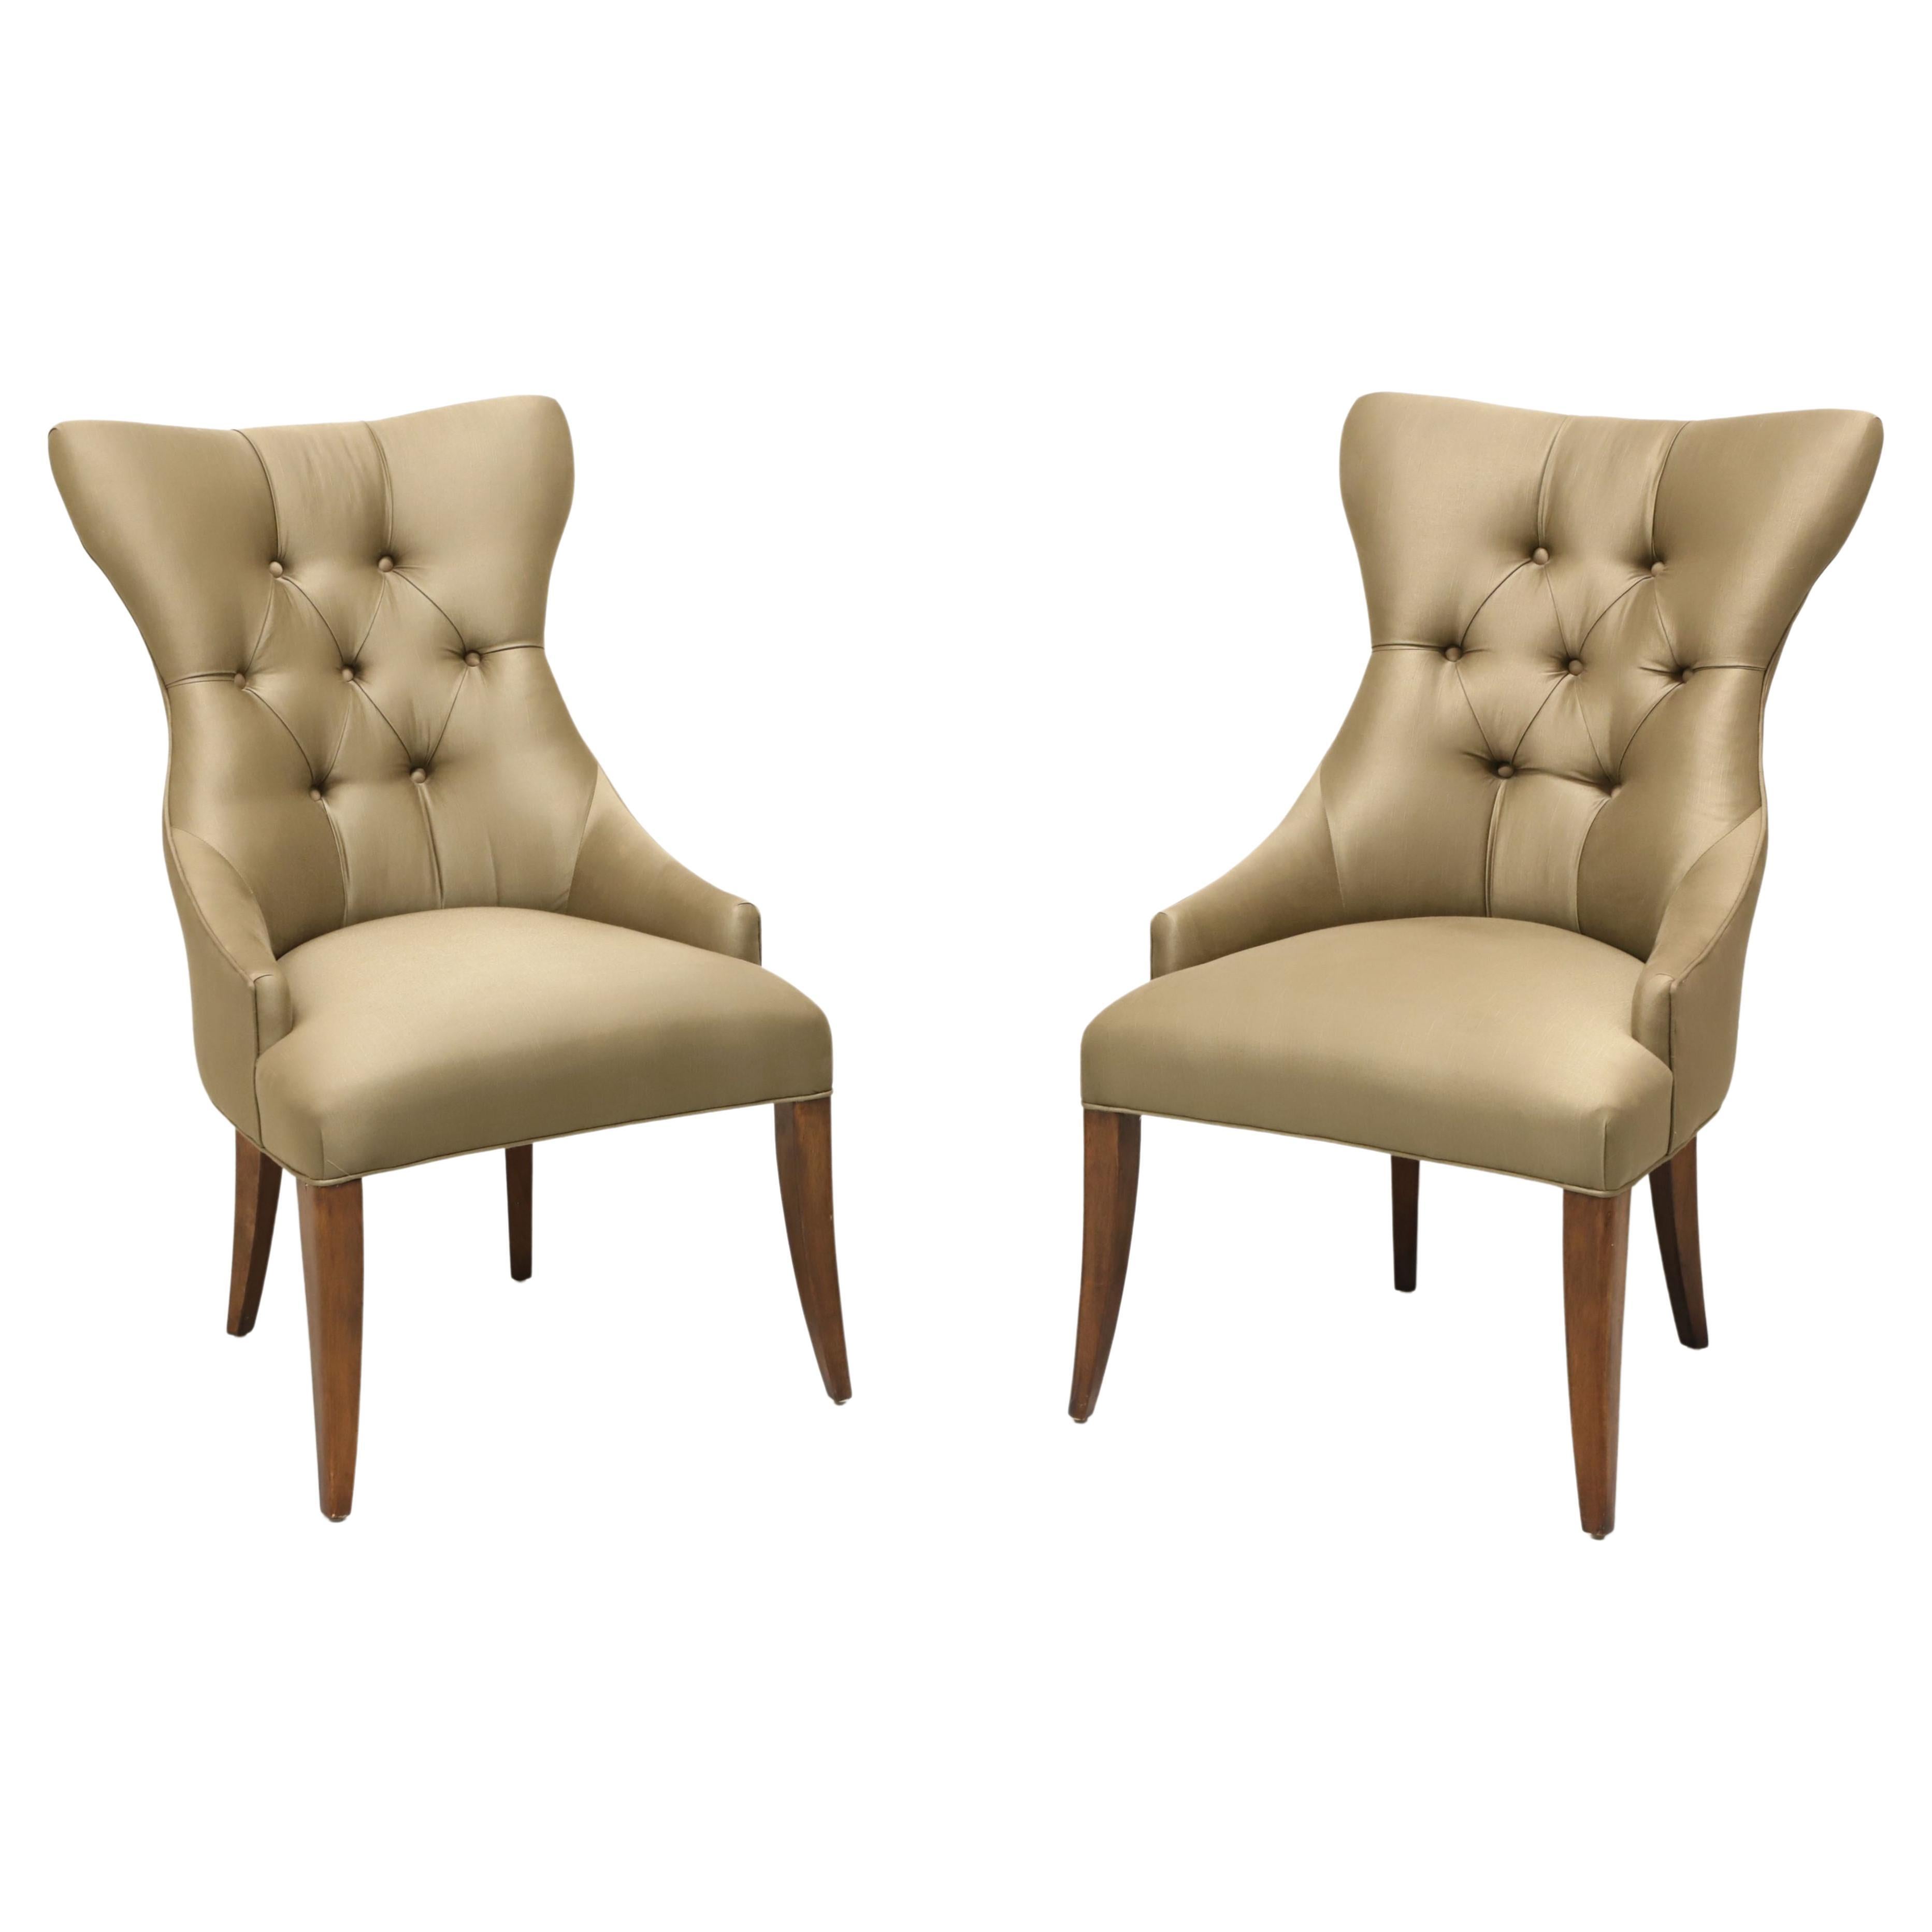 BERNHARDT Opus XIX Tufted Dining Side Chair - Pair B For Sale